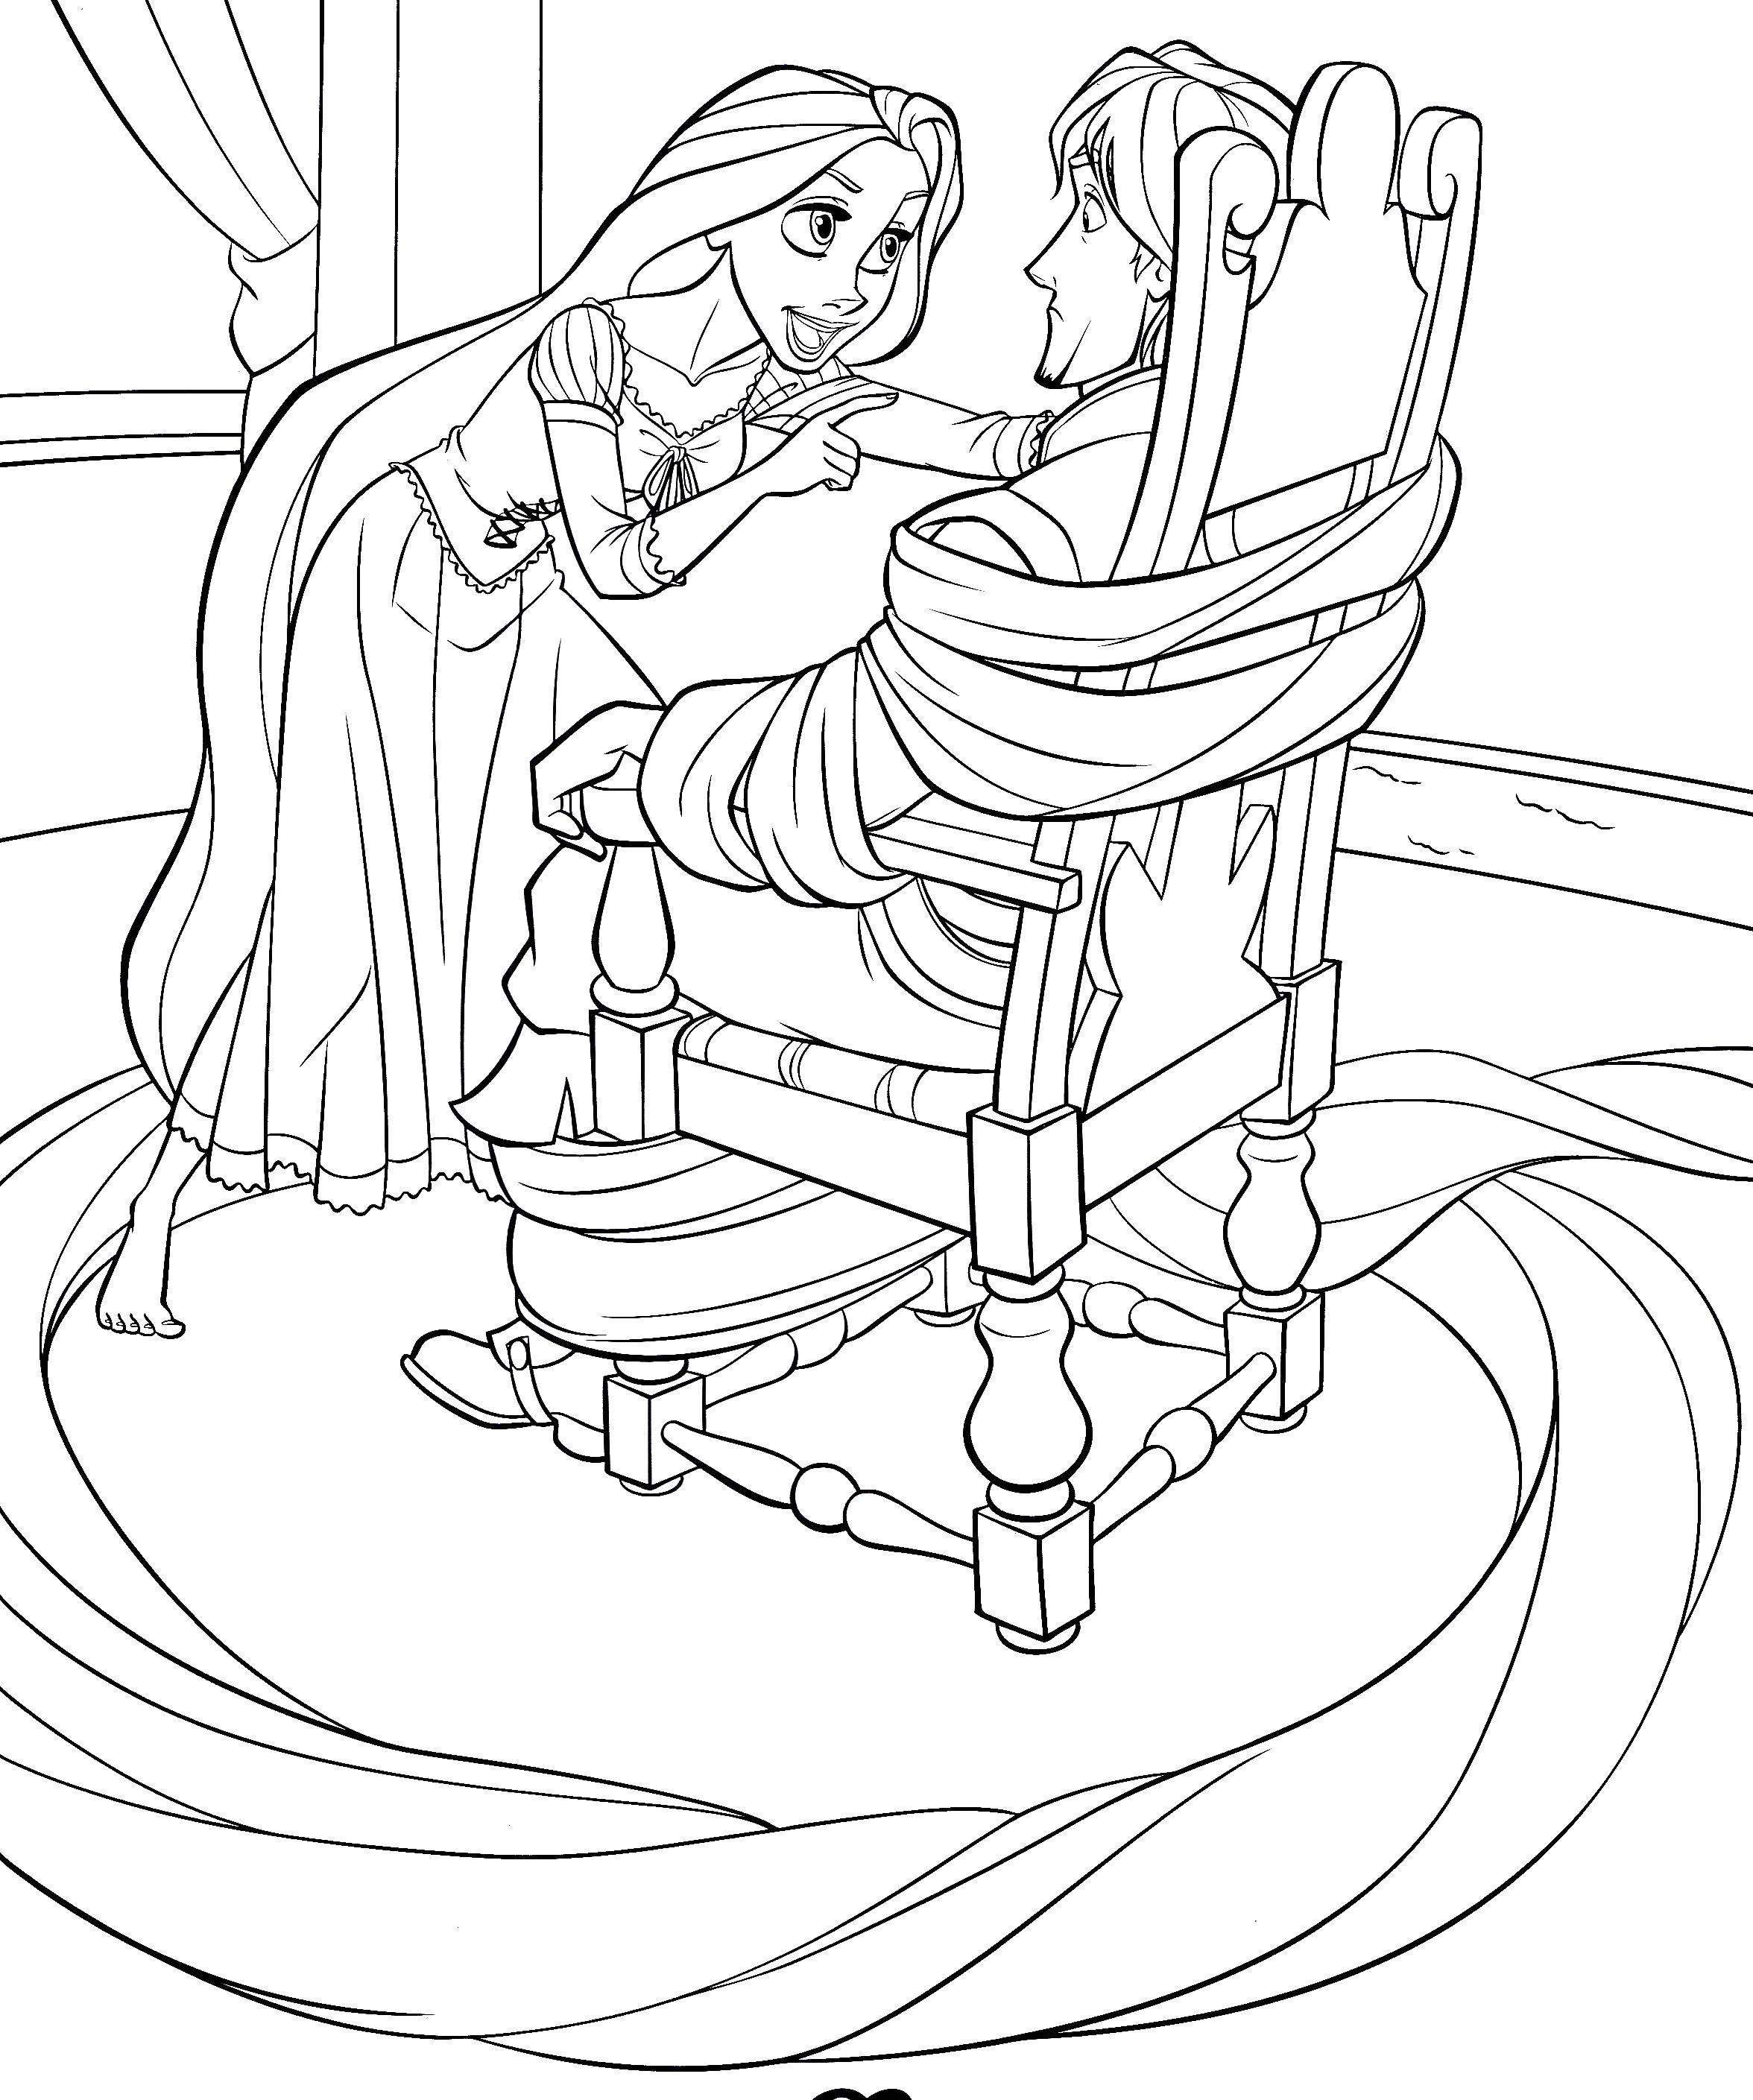 Coloring Rapunzel caught Flynn. Category coloring pages Rapunzel tangled. Tags:  Rapunzel .